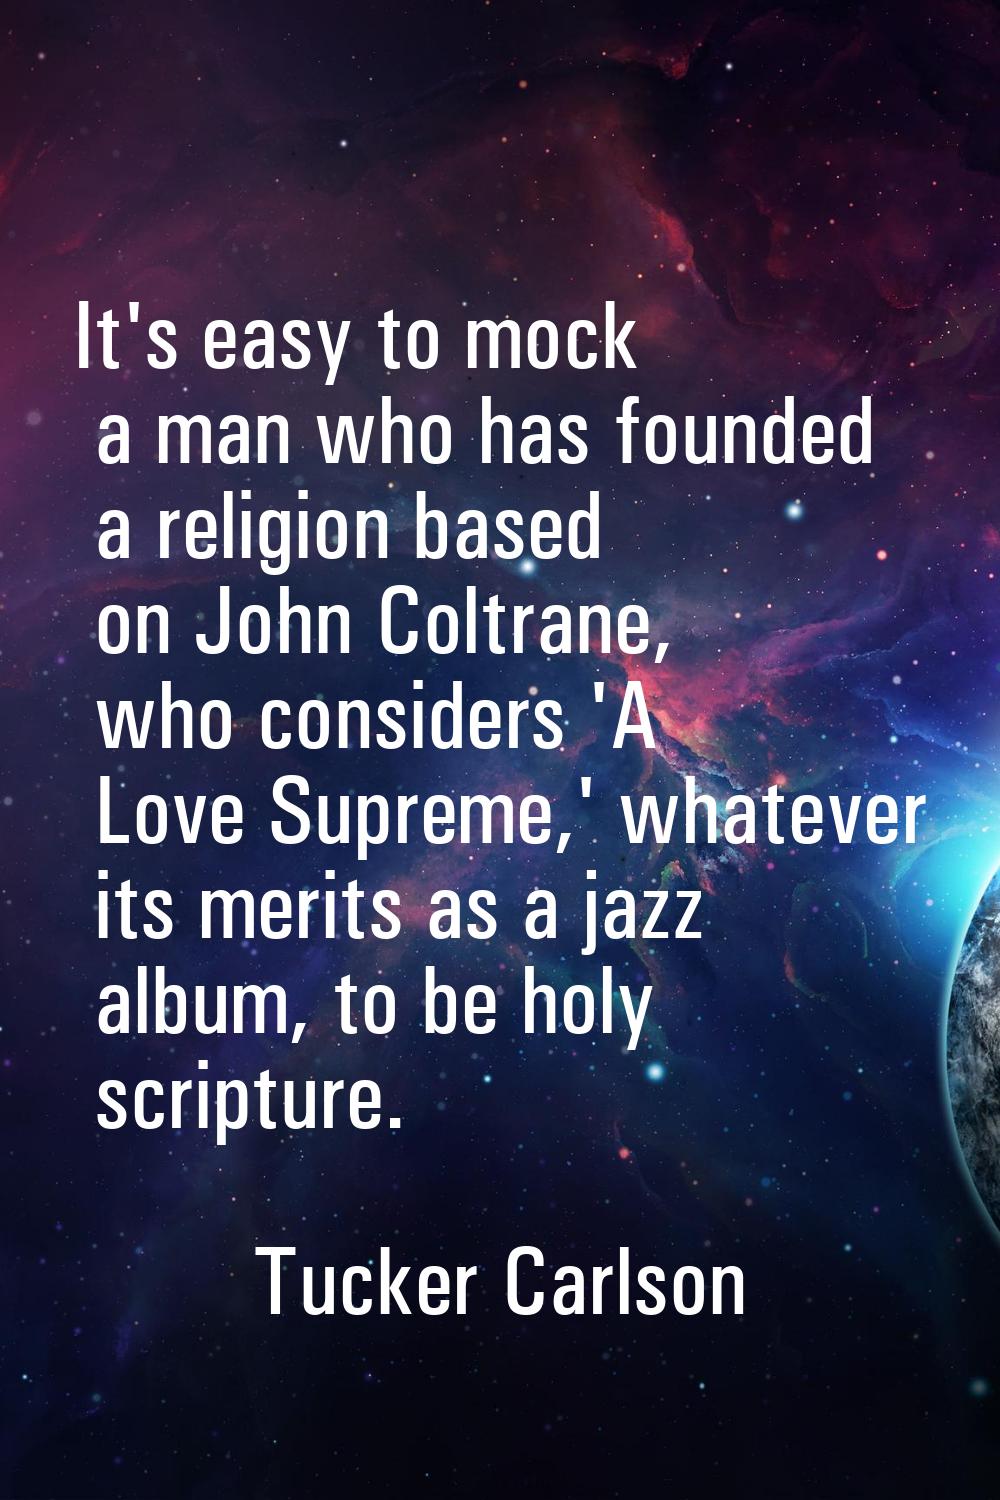 It's easy to mock a man who has founded a religion based on John Coltrane, who considers 'A Love Su